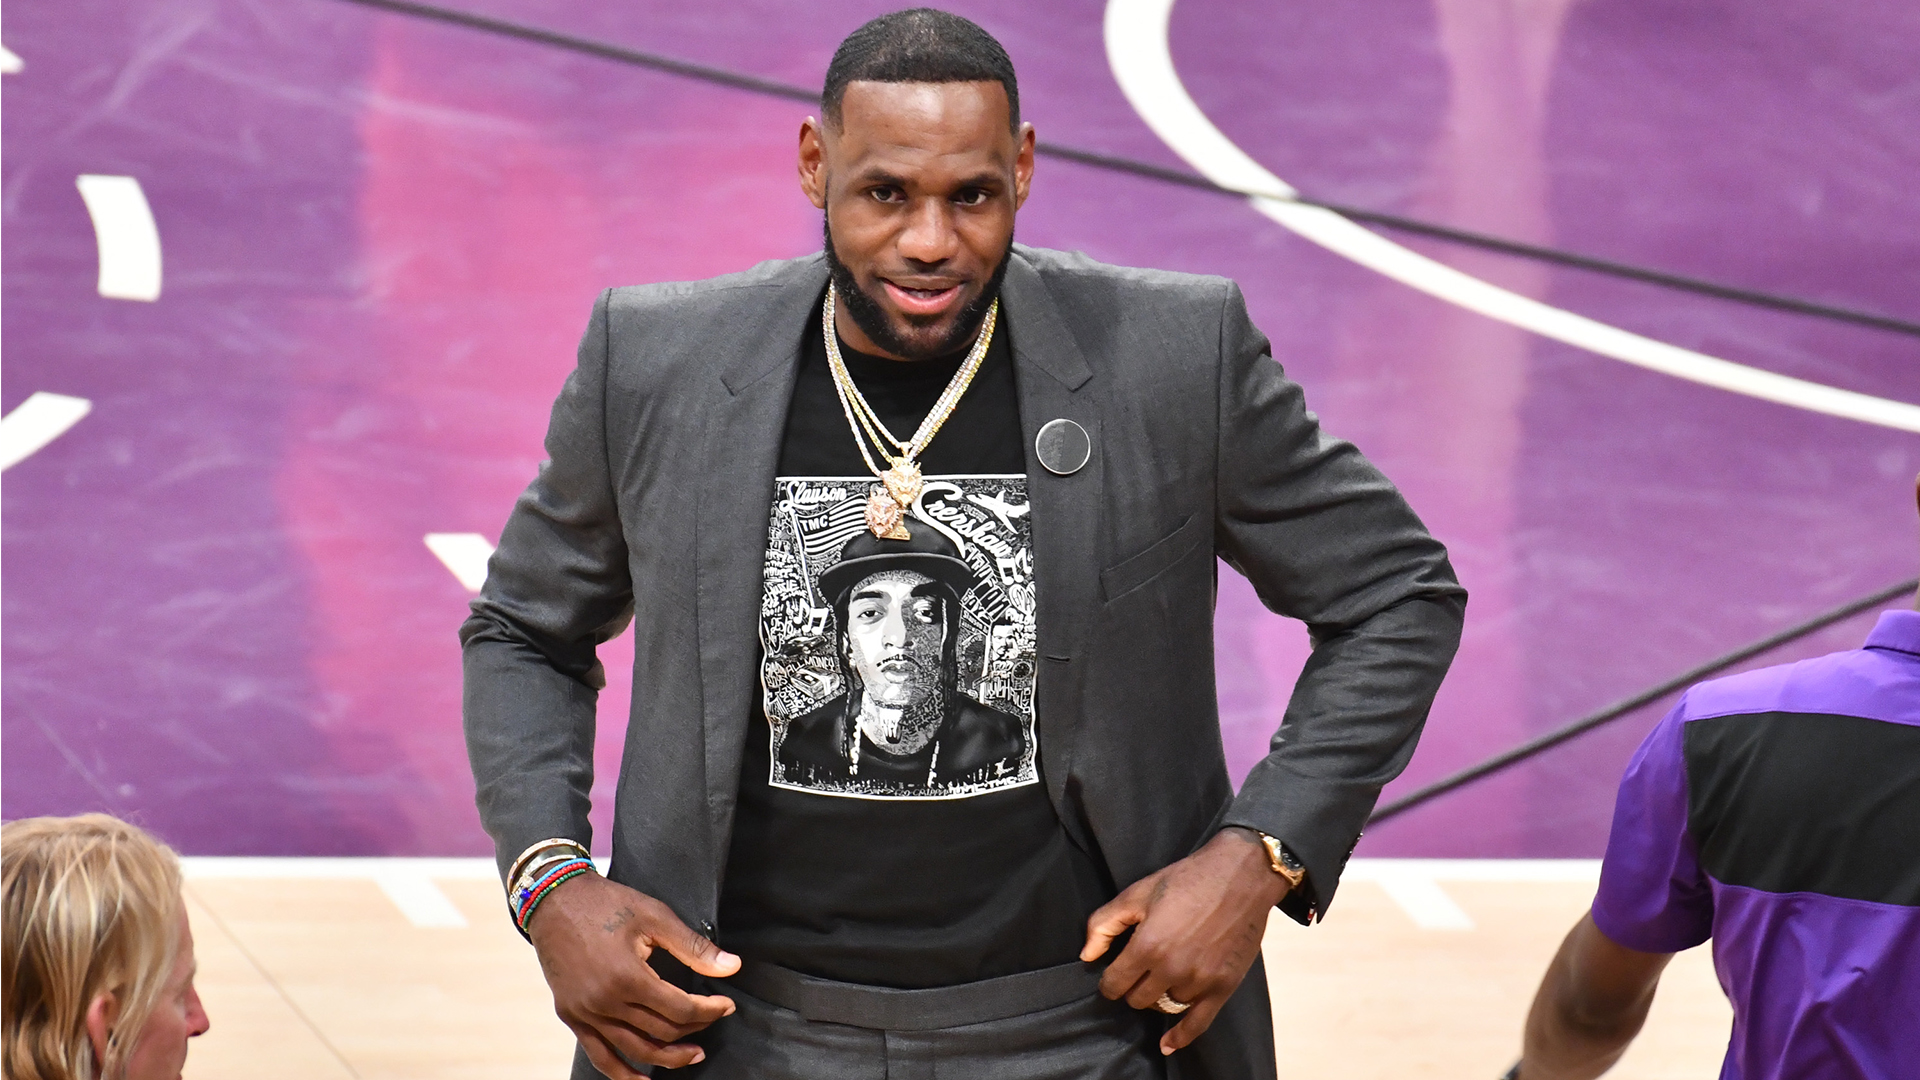 LeBron James Becomes Investor In Live-Streaming Culinary Platform That Aims To Be The Twitch For Chefs